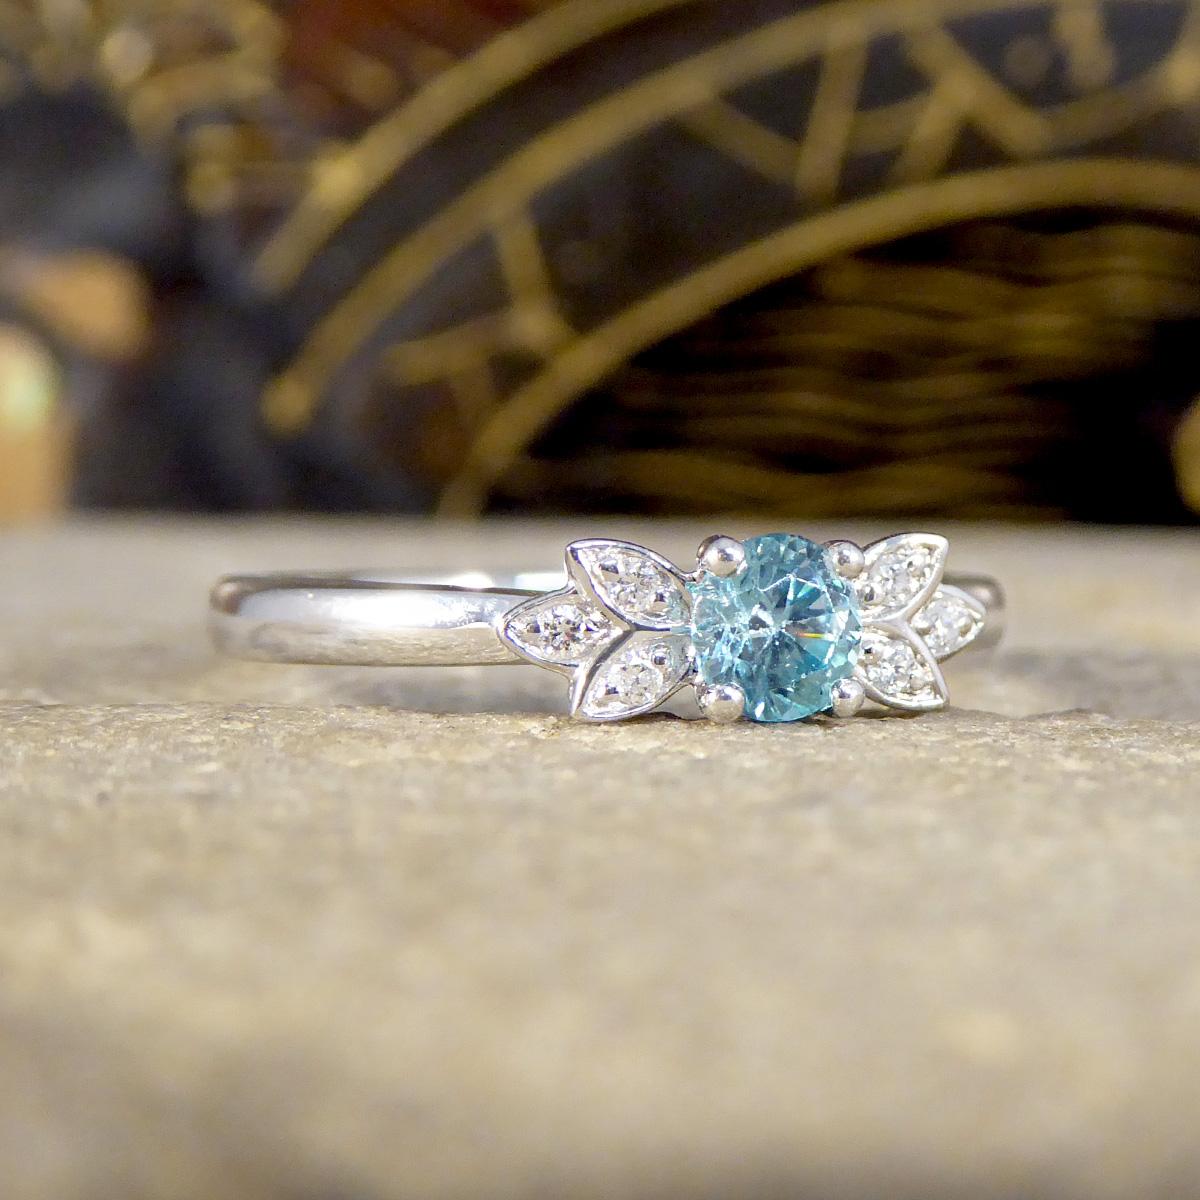 At the heart of this beautiful and dainty ring, a vibrant blue zircon dazzles with its deep, oceanic hues, reminiscent of the most serene waters. Surrounding this central gemstone, diamonds are meticulously set to form delicate butterfly wings,